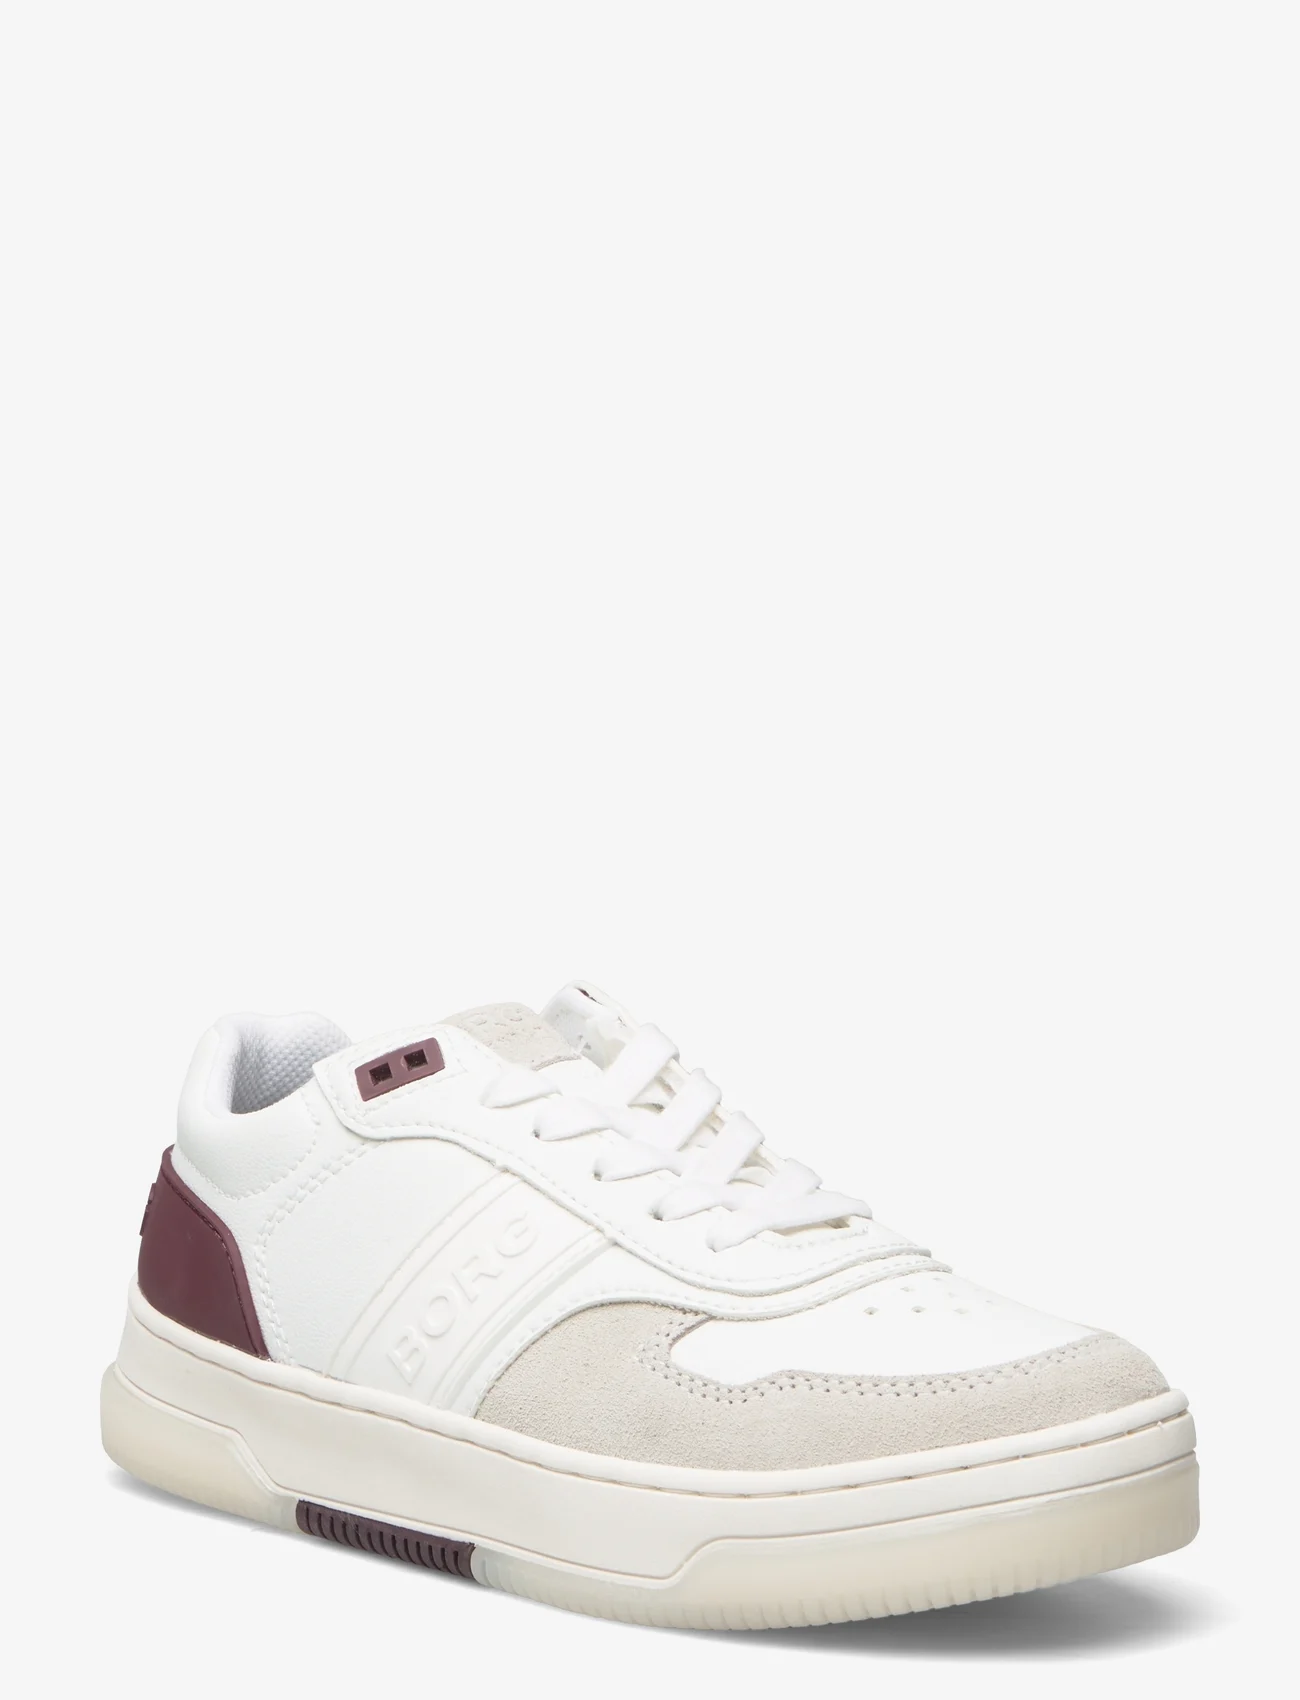 Björn Borg - T2300 CTR W - lage sneakers - wht-brgy - 0